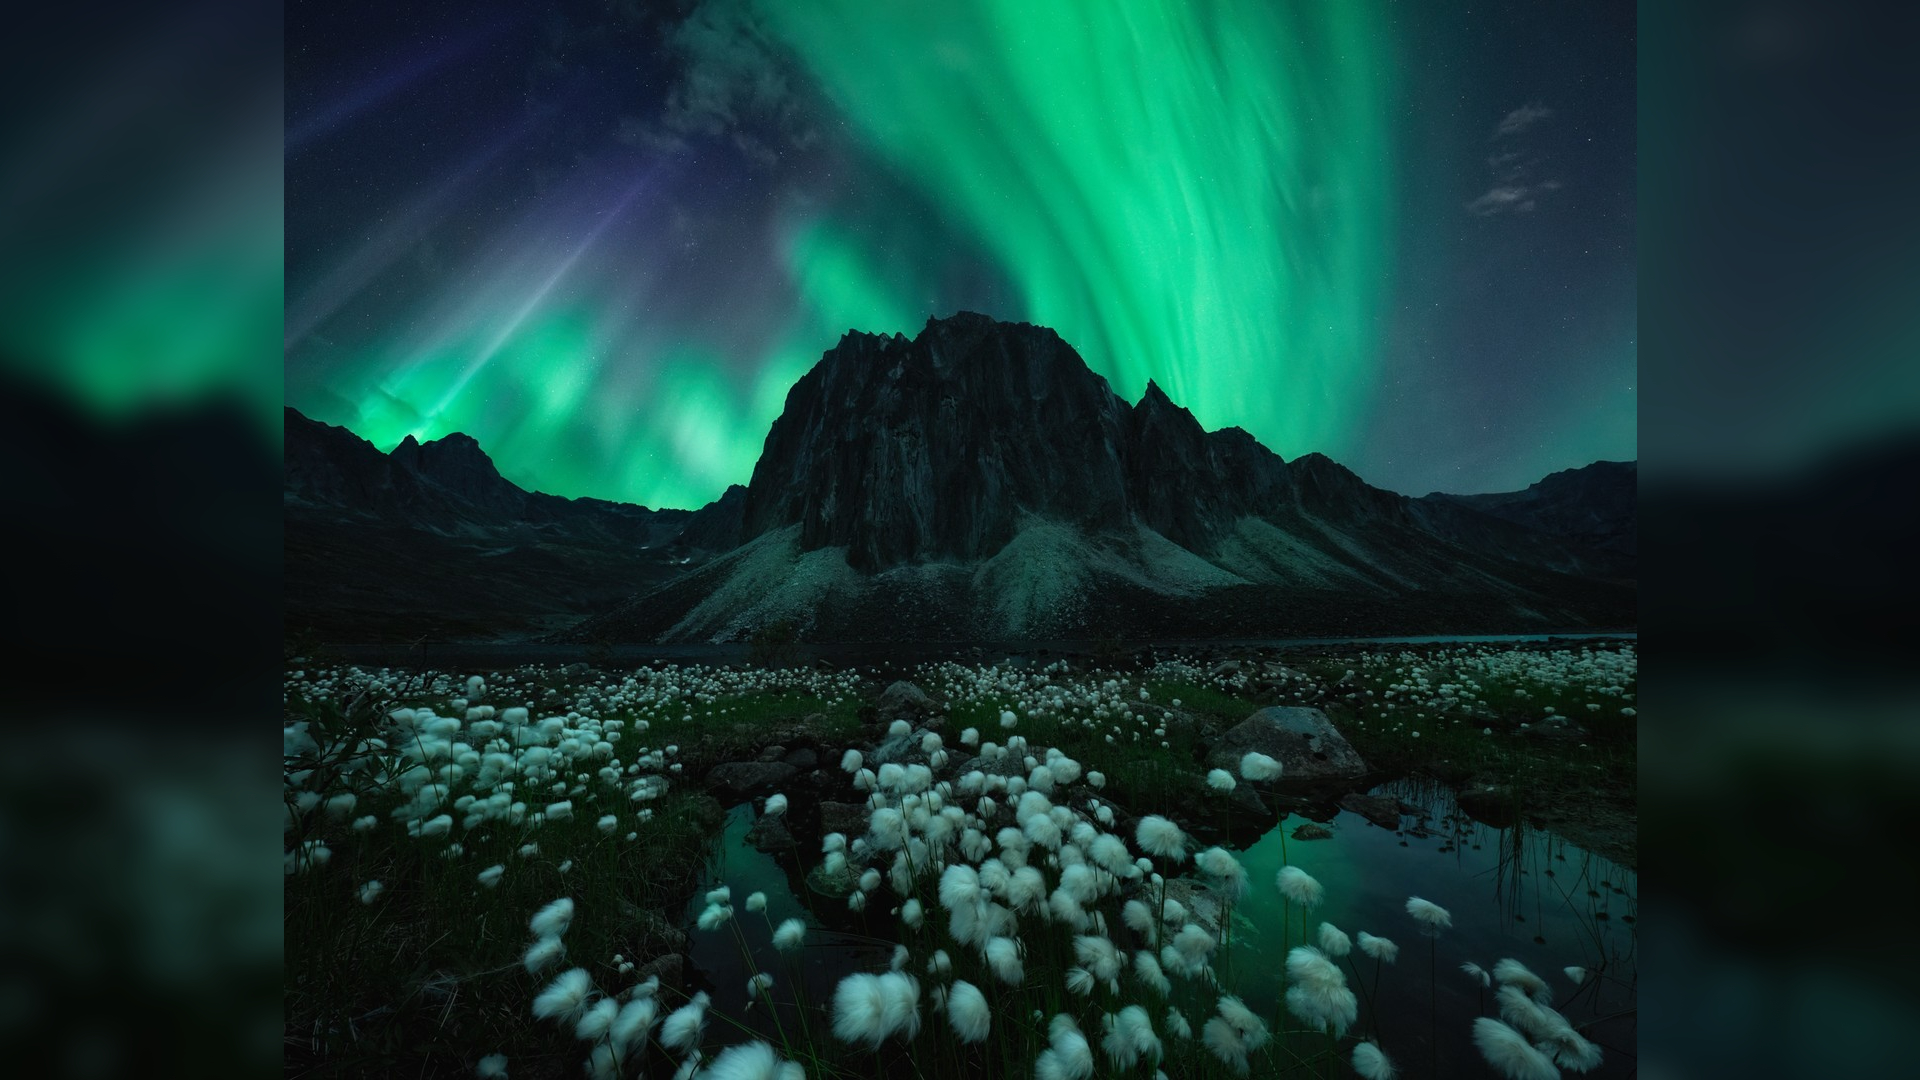 A photo of the northern lights, part of the travel photography blog Capture the Atlas 2022 Northern Lights Photographer of the Year collection. This image was taken by Rachel Jones Ross.